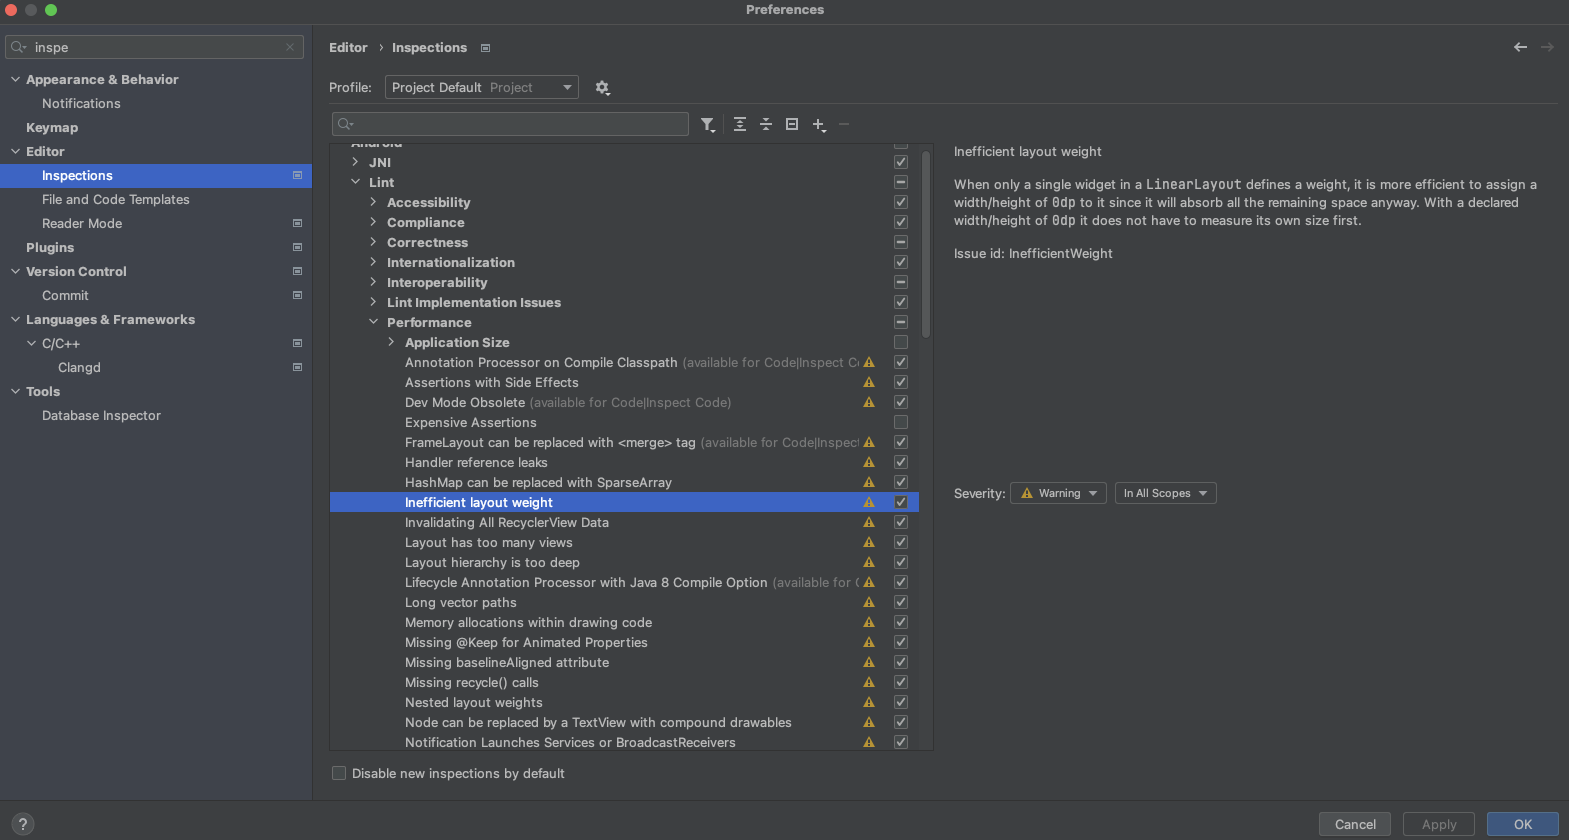 An image showing Android Studio Inspections menu